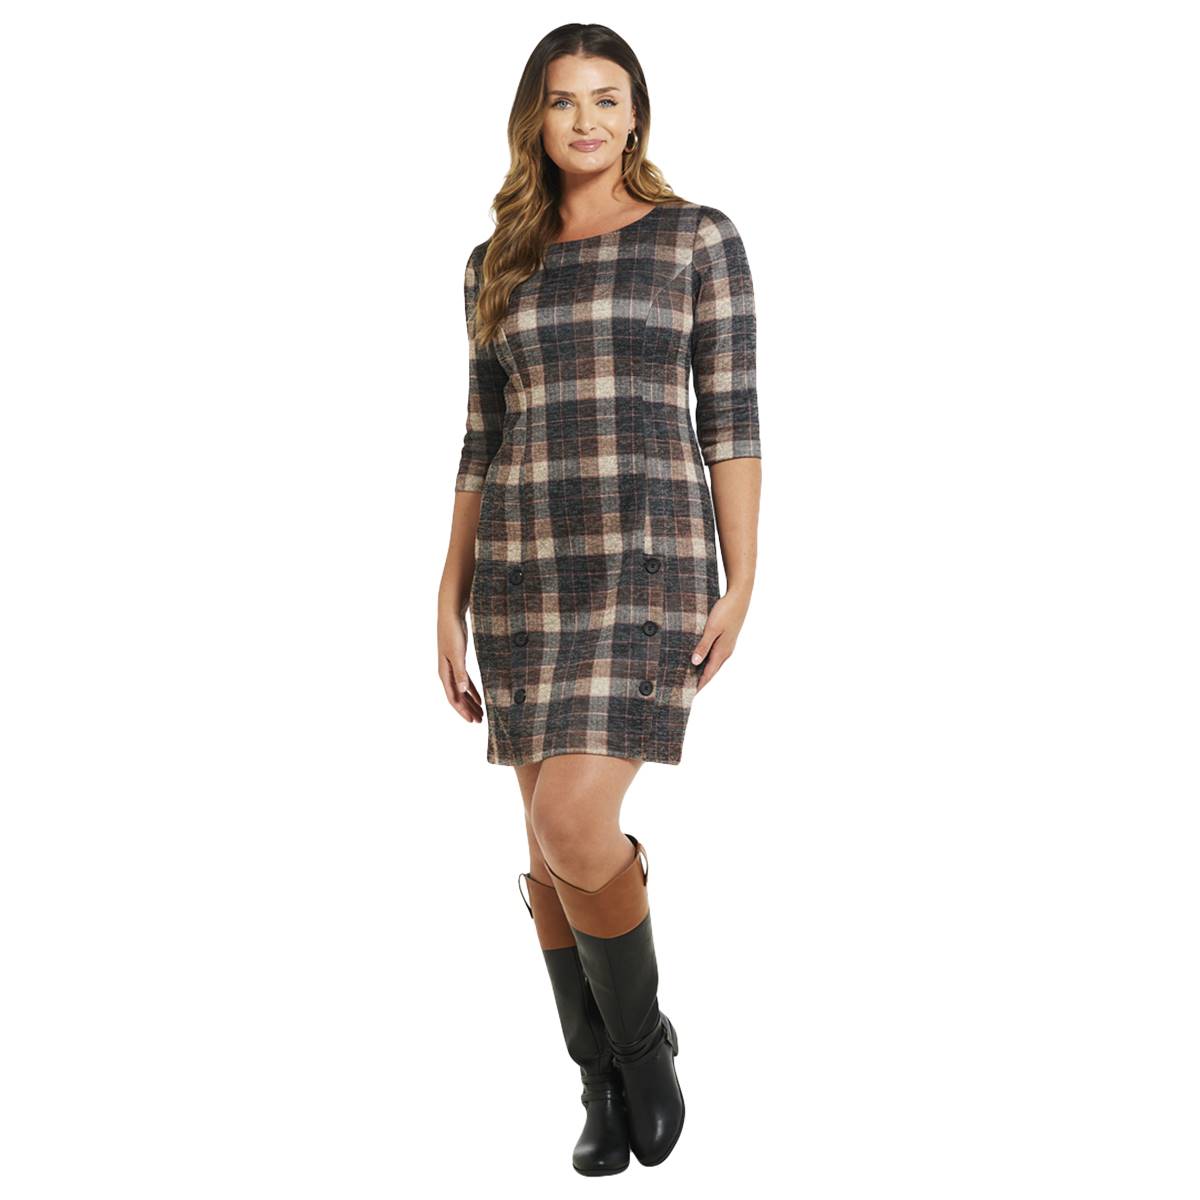 Womens Connected Apparel Elbow Sleeve Plaid A-Line Dress